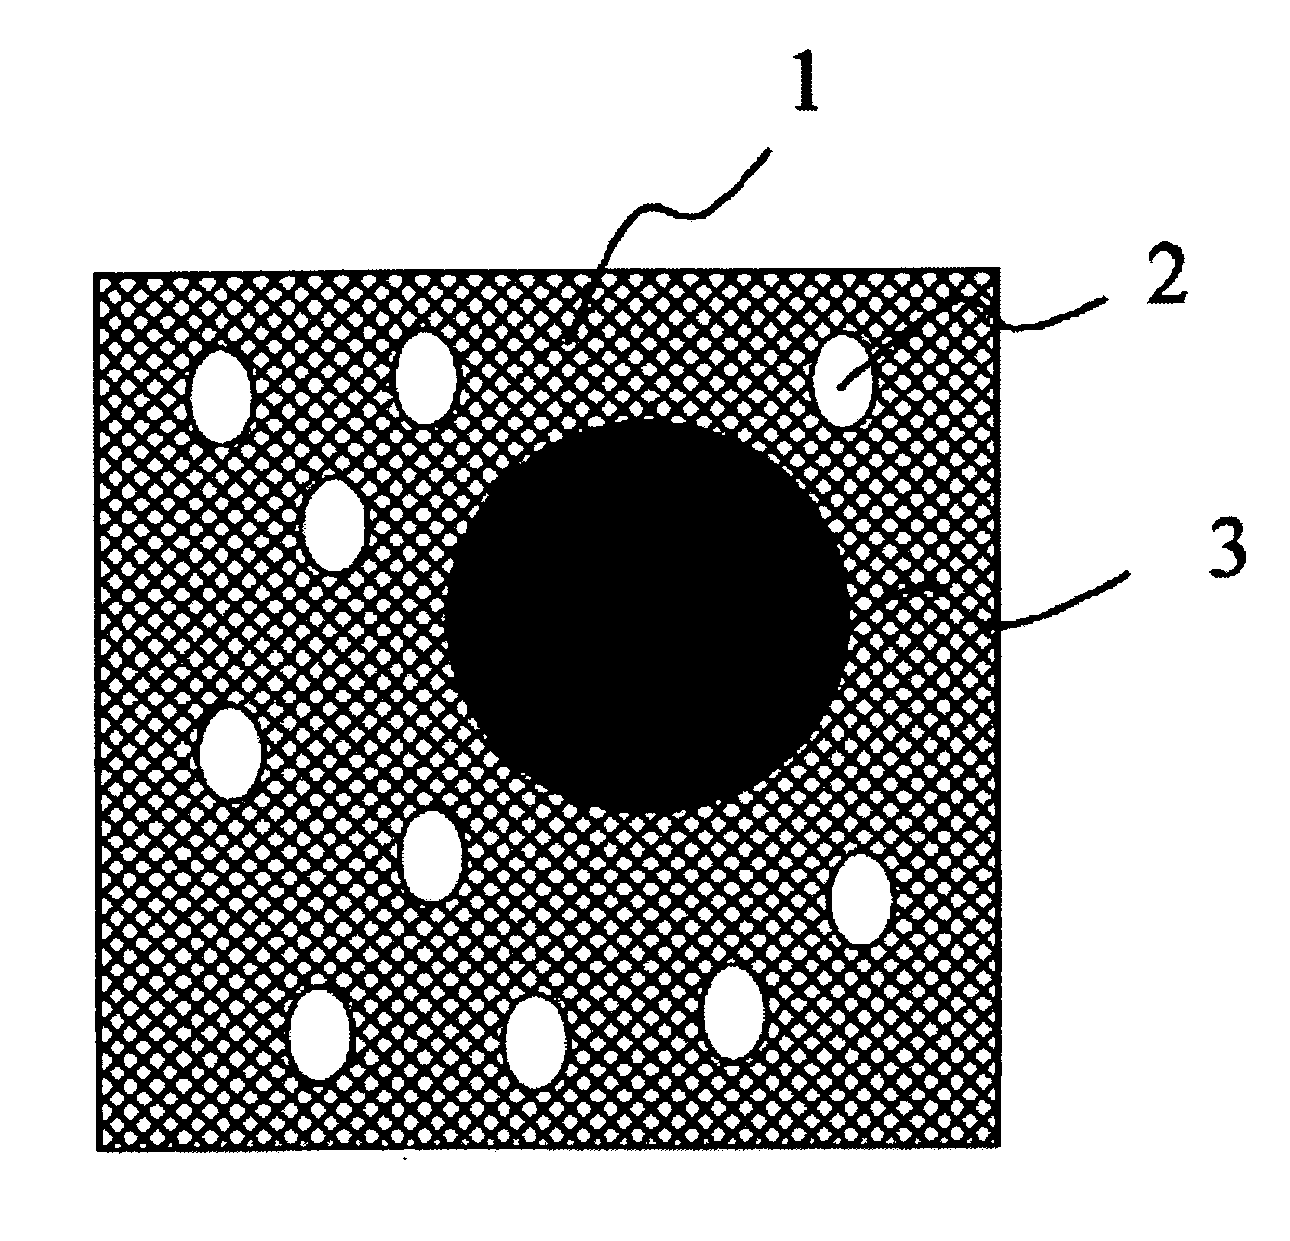 Fiber reinforced resin composition, molding material, and method for producing fiber reinforced resin composition